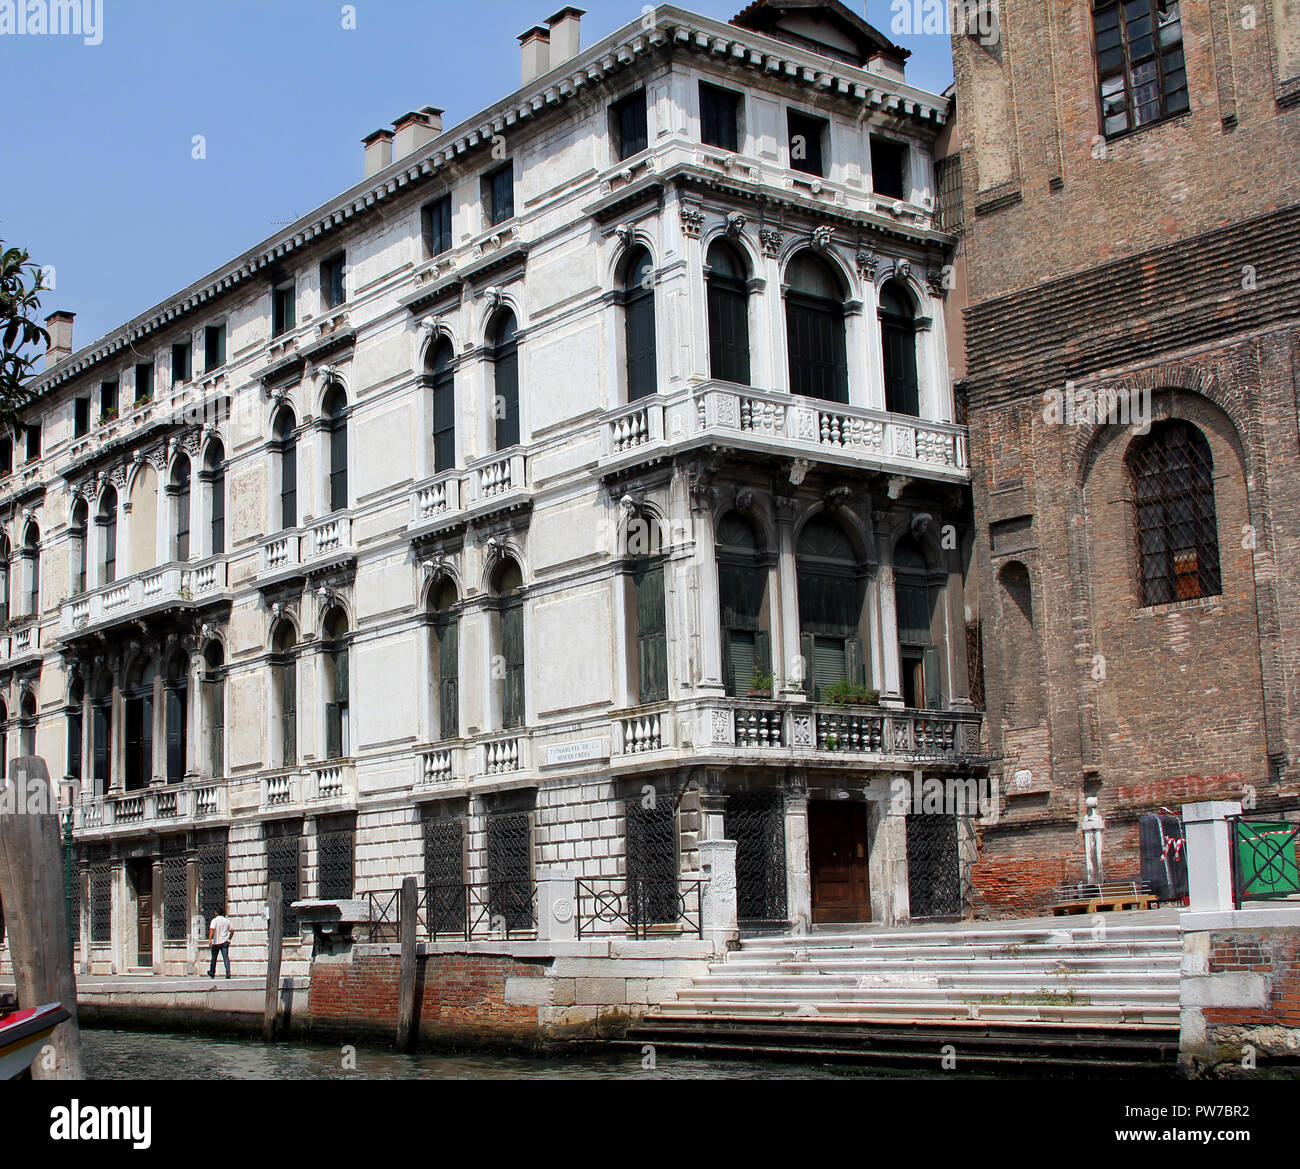 Despite being a city that is built on marshes and canals, and sinking, Venice still has many grand builds standing proud. Stock Photo